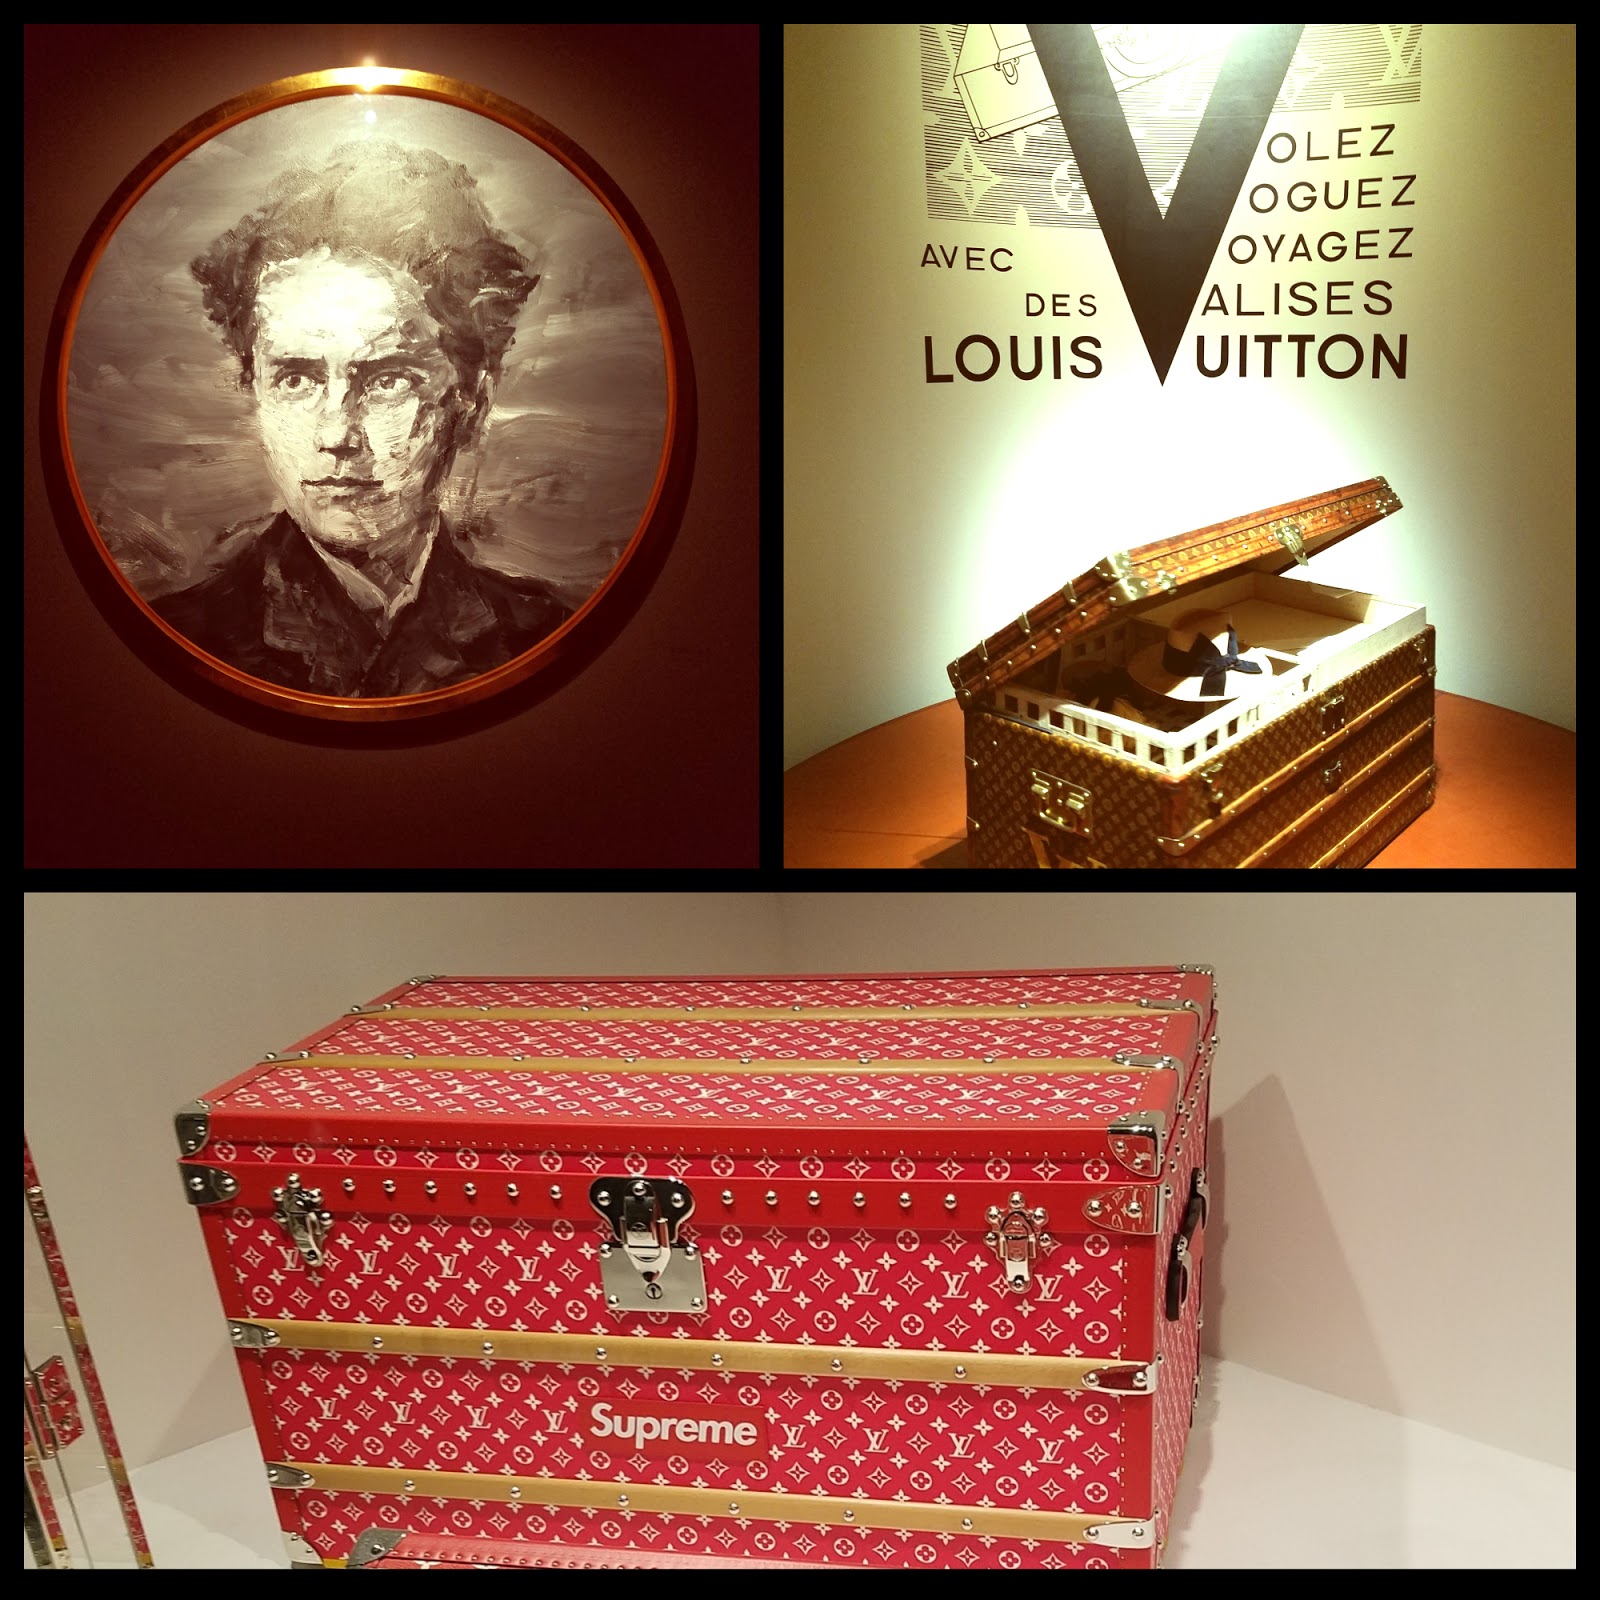 NYC Louis Vuitton Exhibit Review – Not Your Average